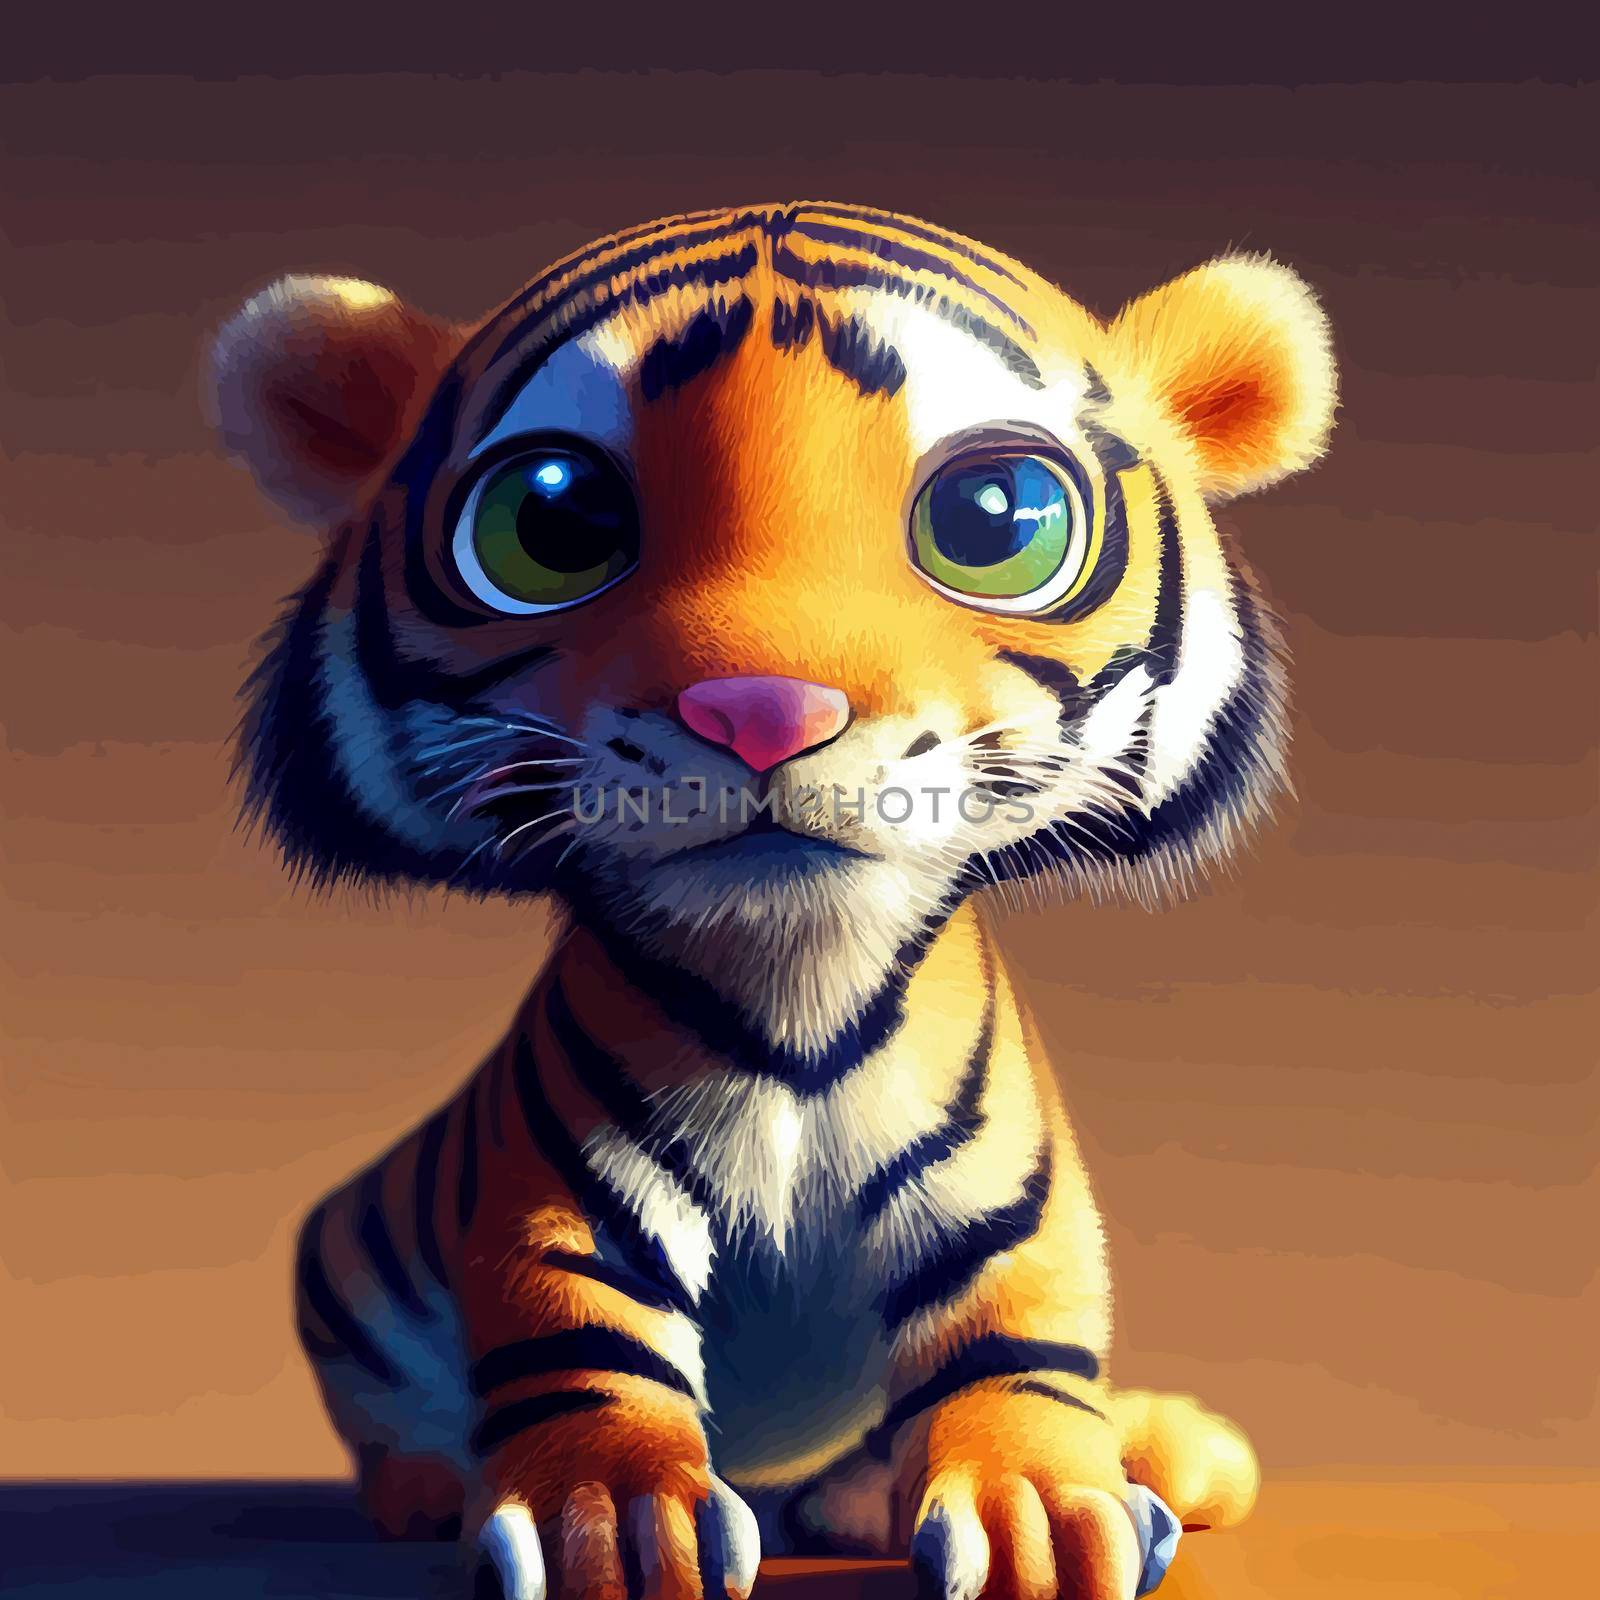 animated illustration of a cute tiger, animated baby tiger portrait by JpRamos